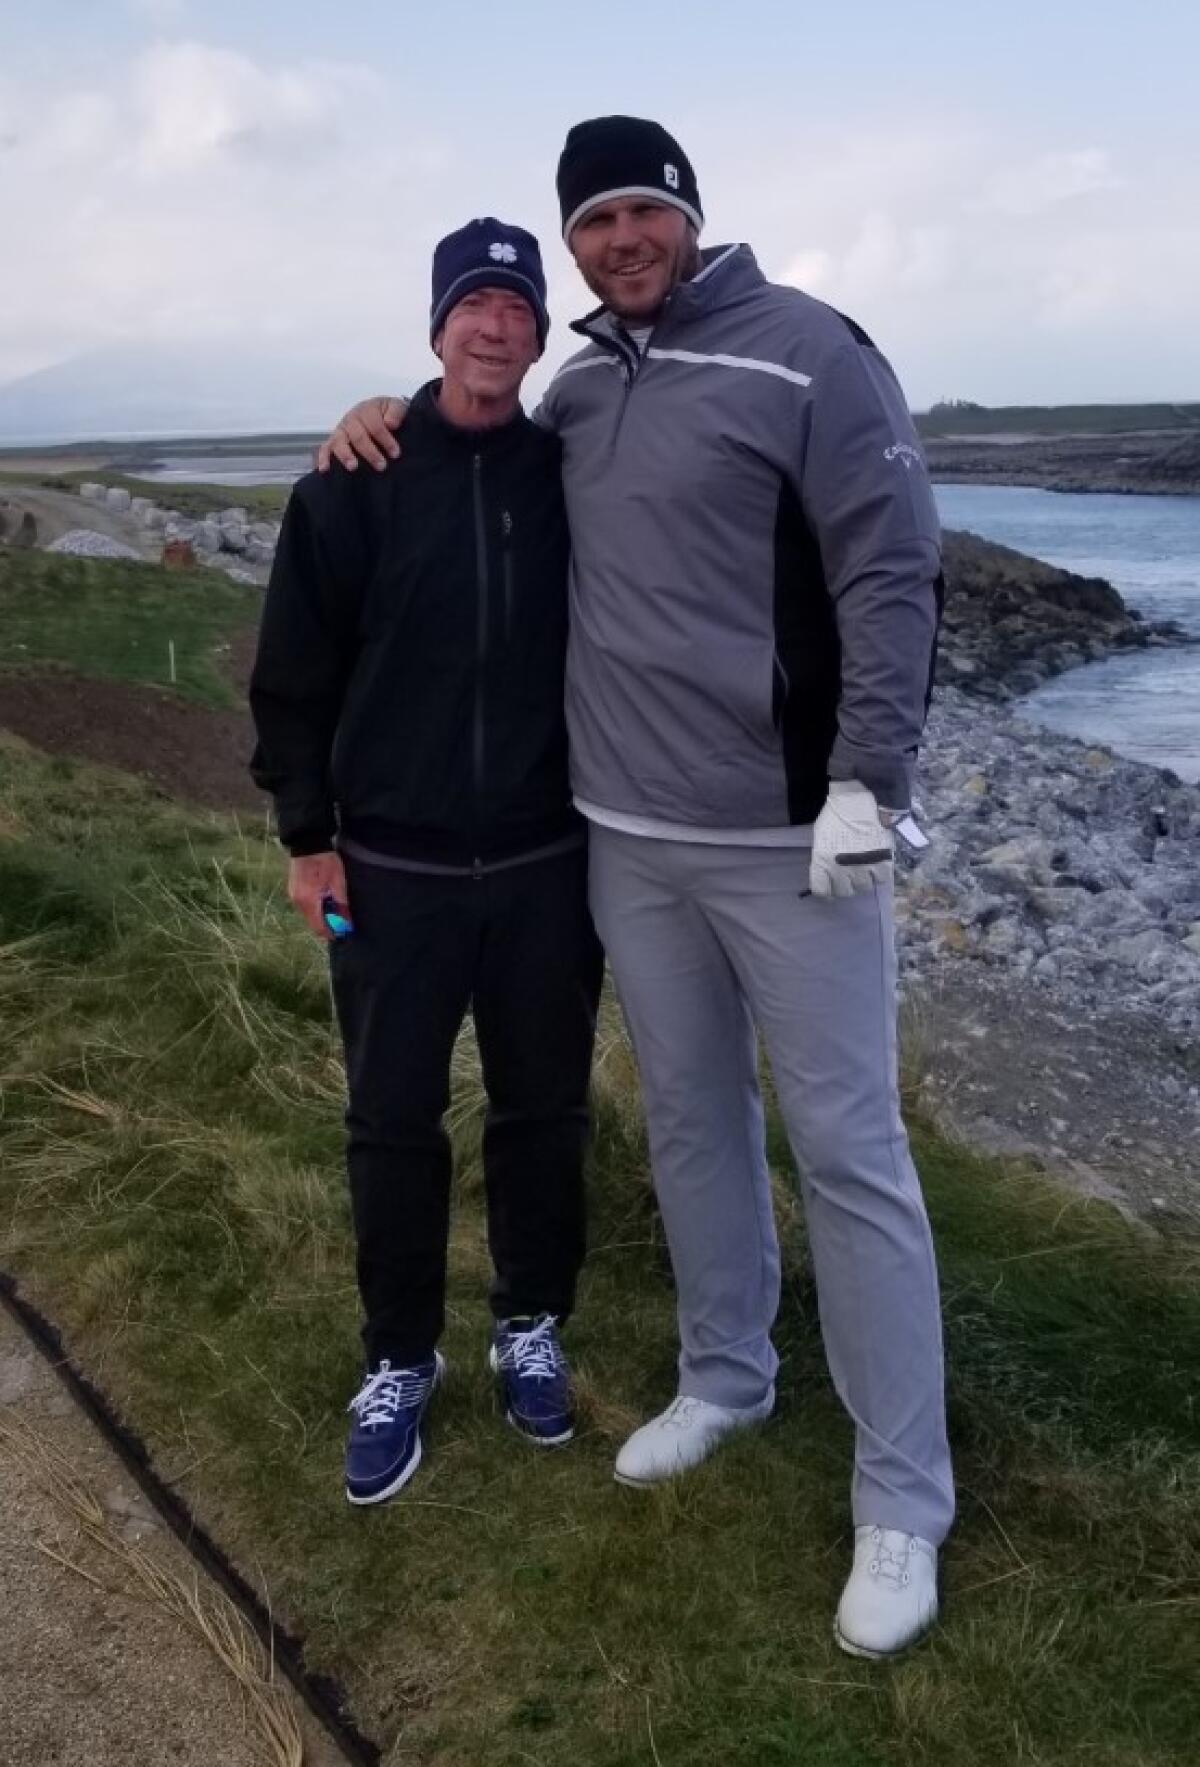 Tony Boselli Jr. and his dad on father's 70th birthday golf trip to Ireland in 2019.